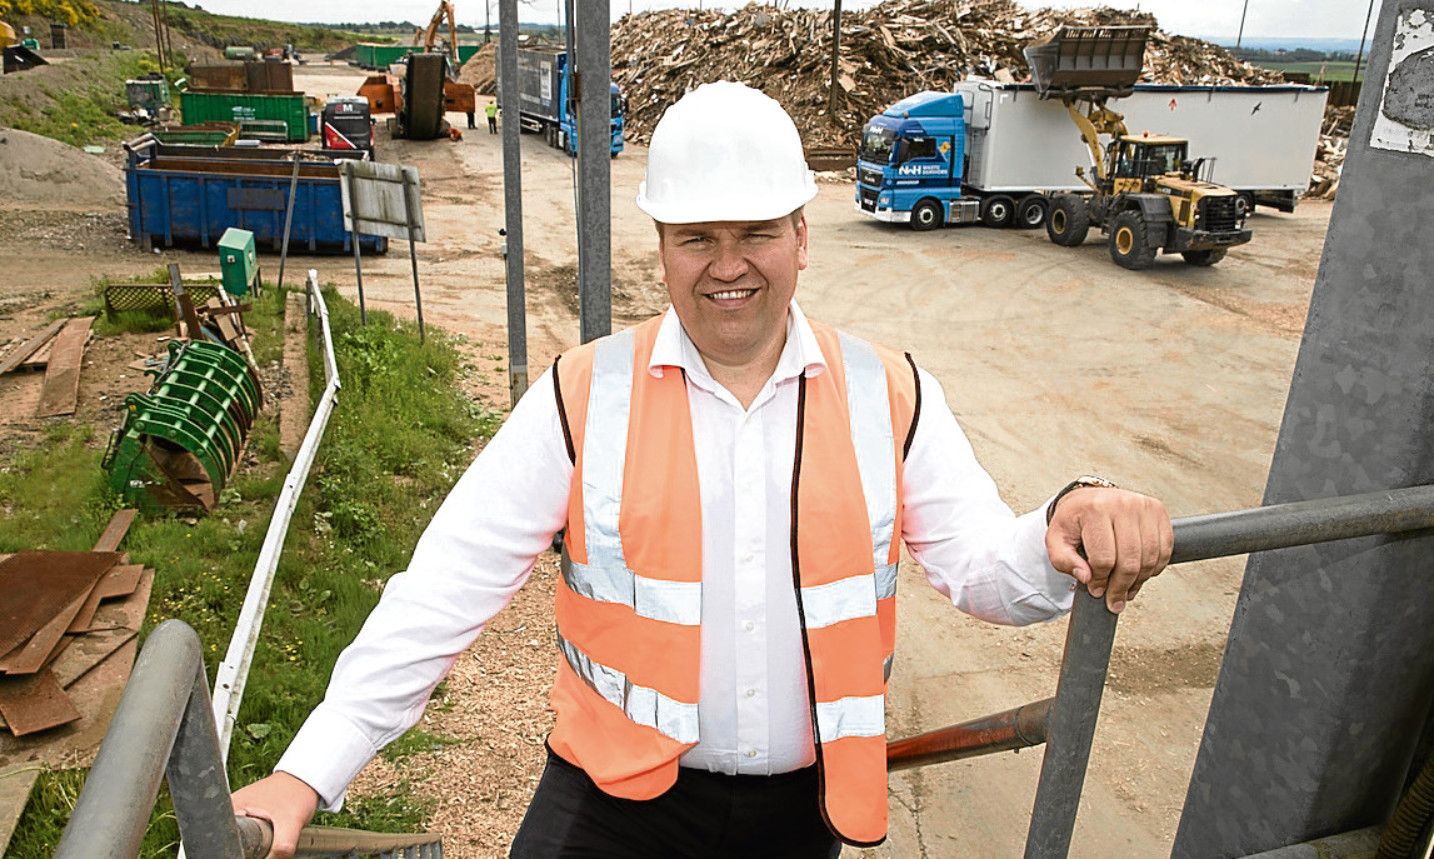 NWH Waste Services managing director Mark Williams at Petterden Recycling Centre